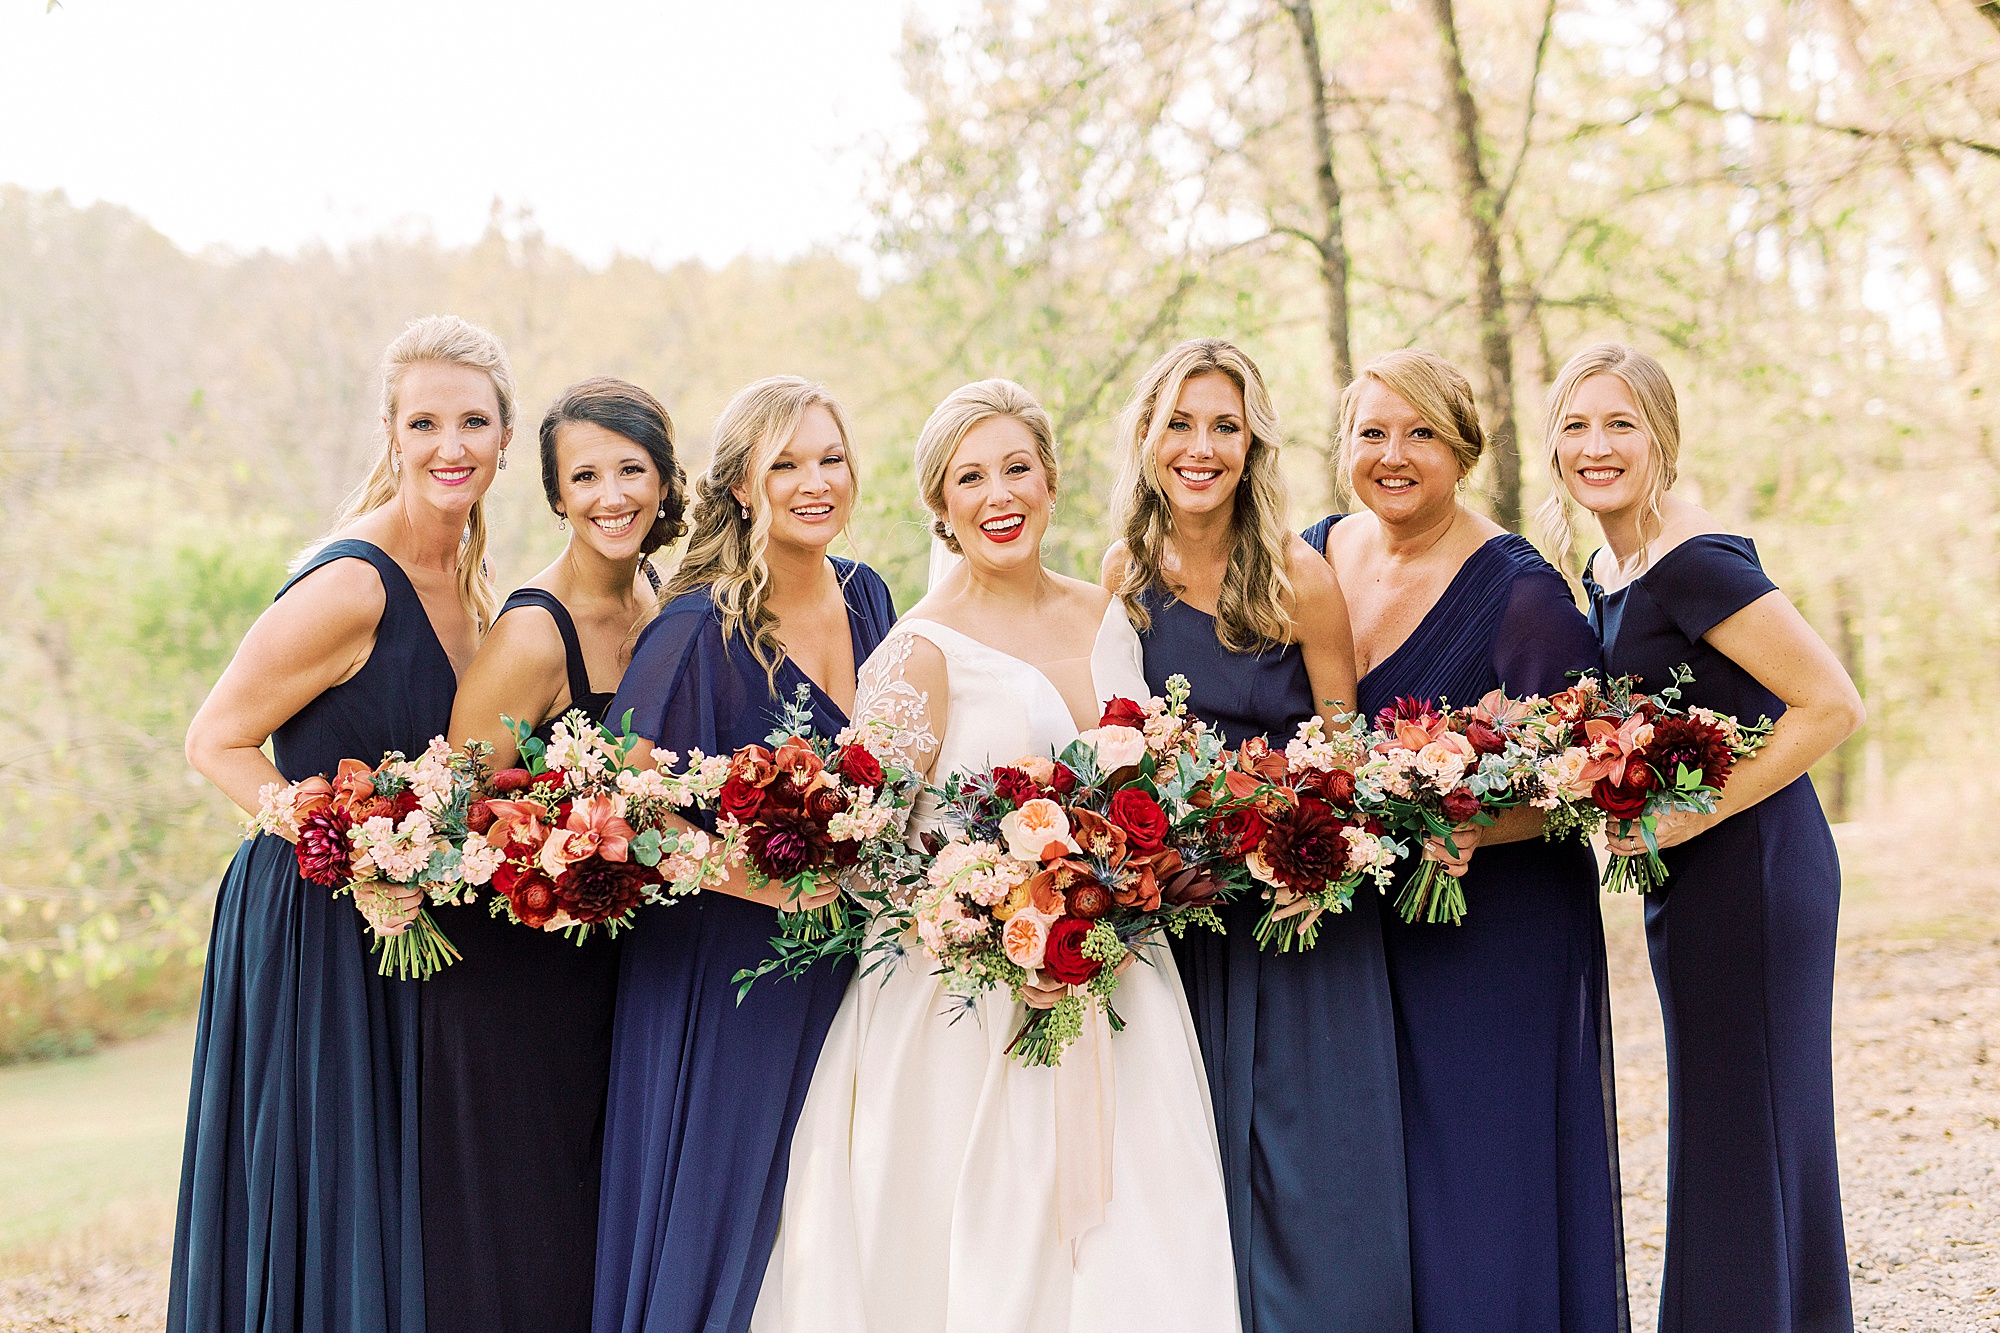 bride poses with bridesmaids in navy blue gowns for fall wedding day